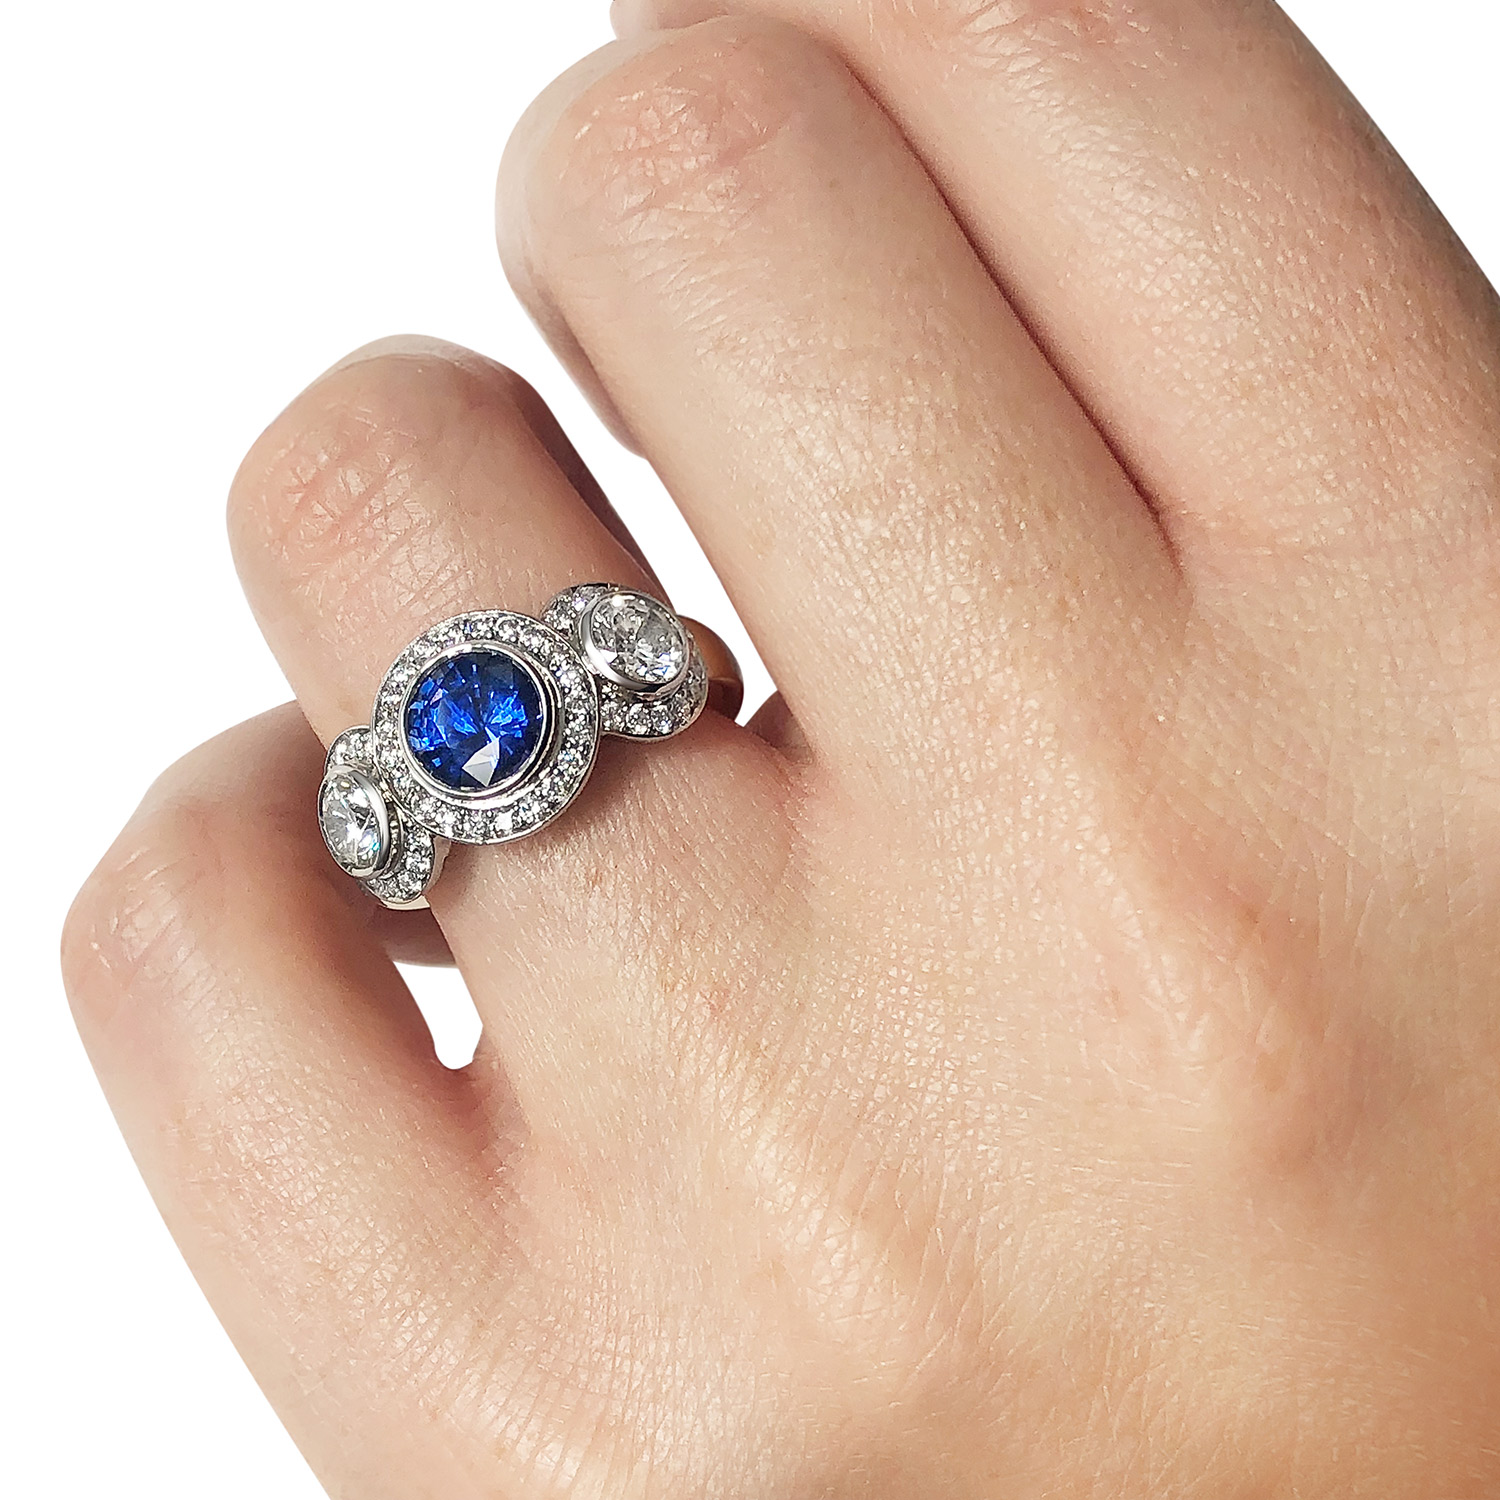 Bespoke sapphire and diamond three-stone halo ring mounted in 18ct white and yellow gold on hand